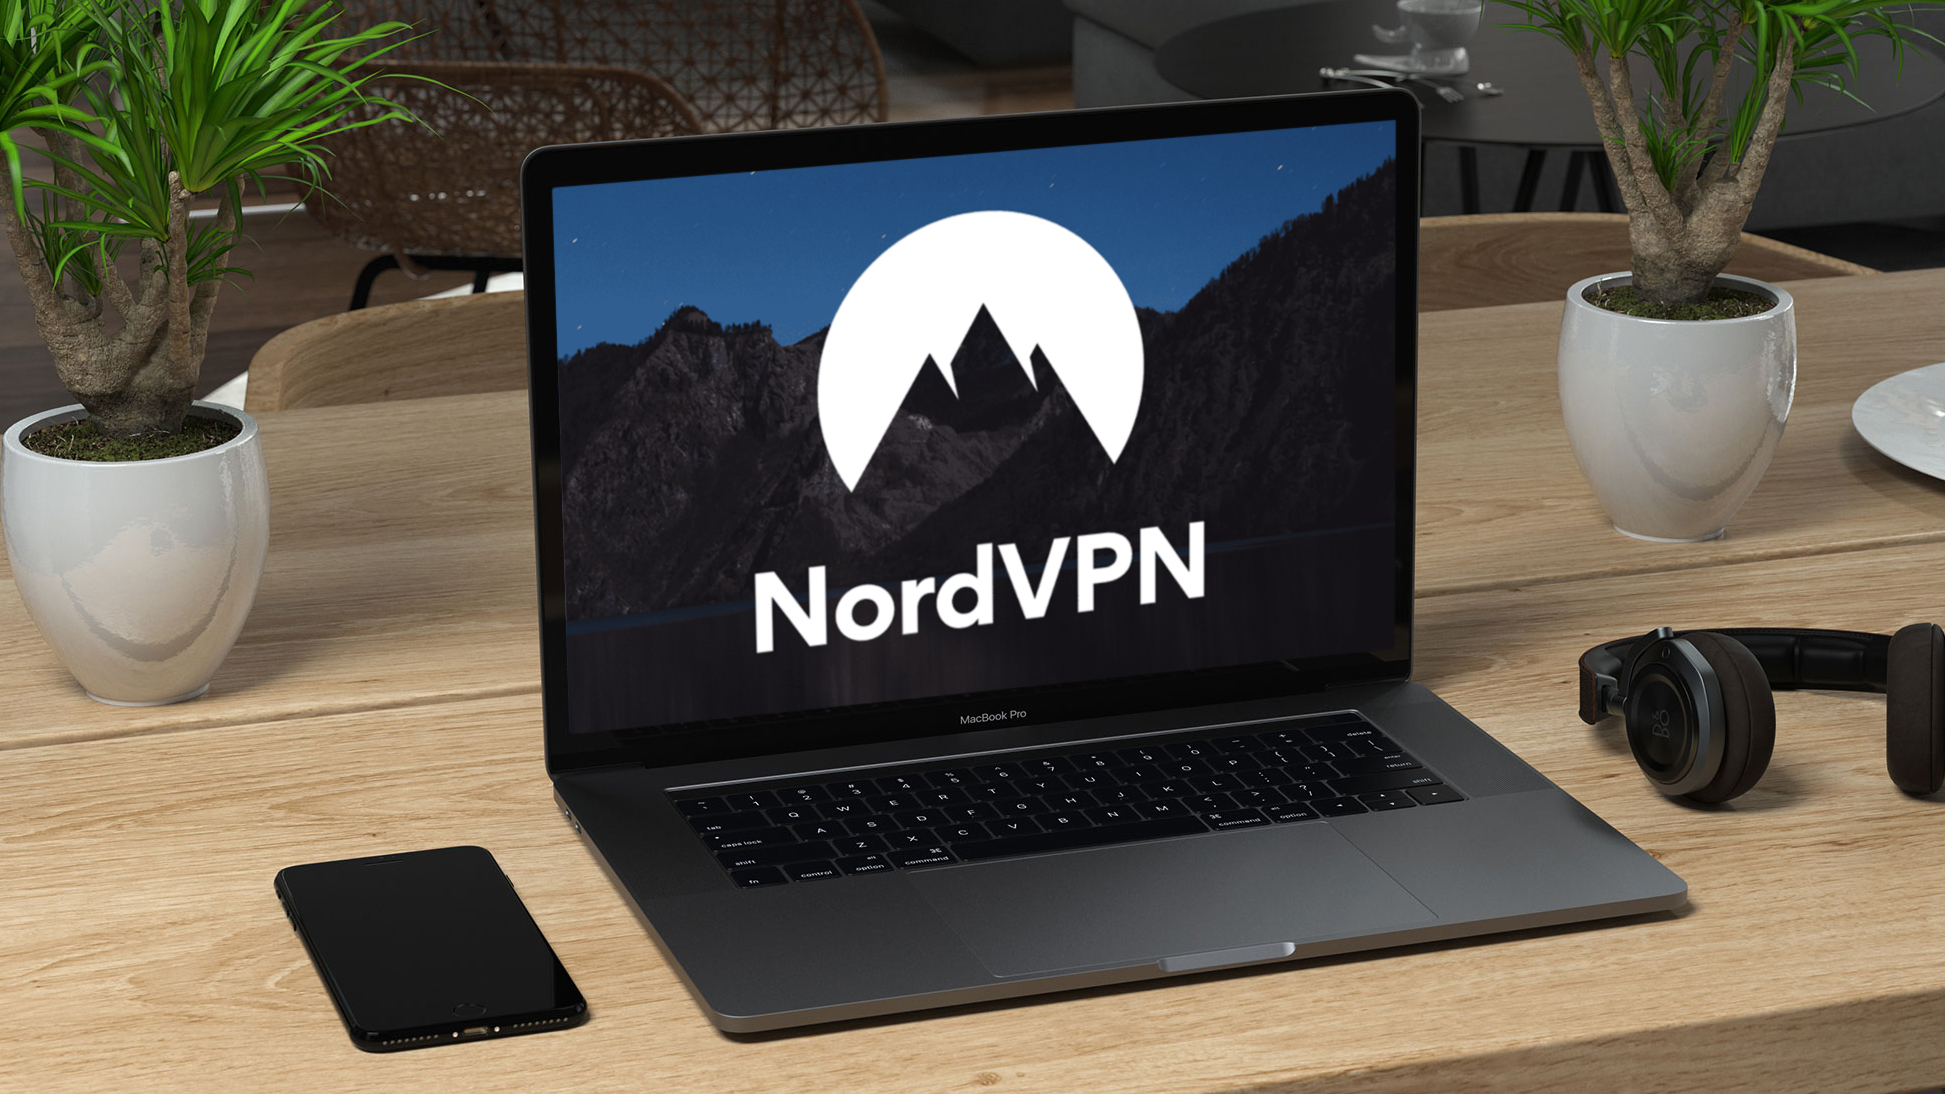 Moving the VPN industry forward: a Q&A with NordVPN